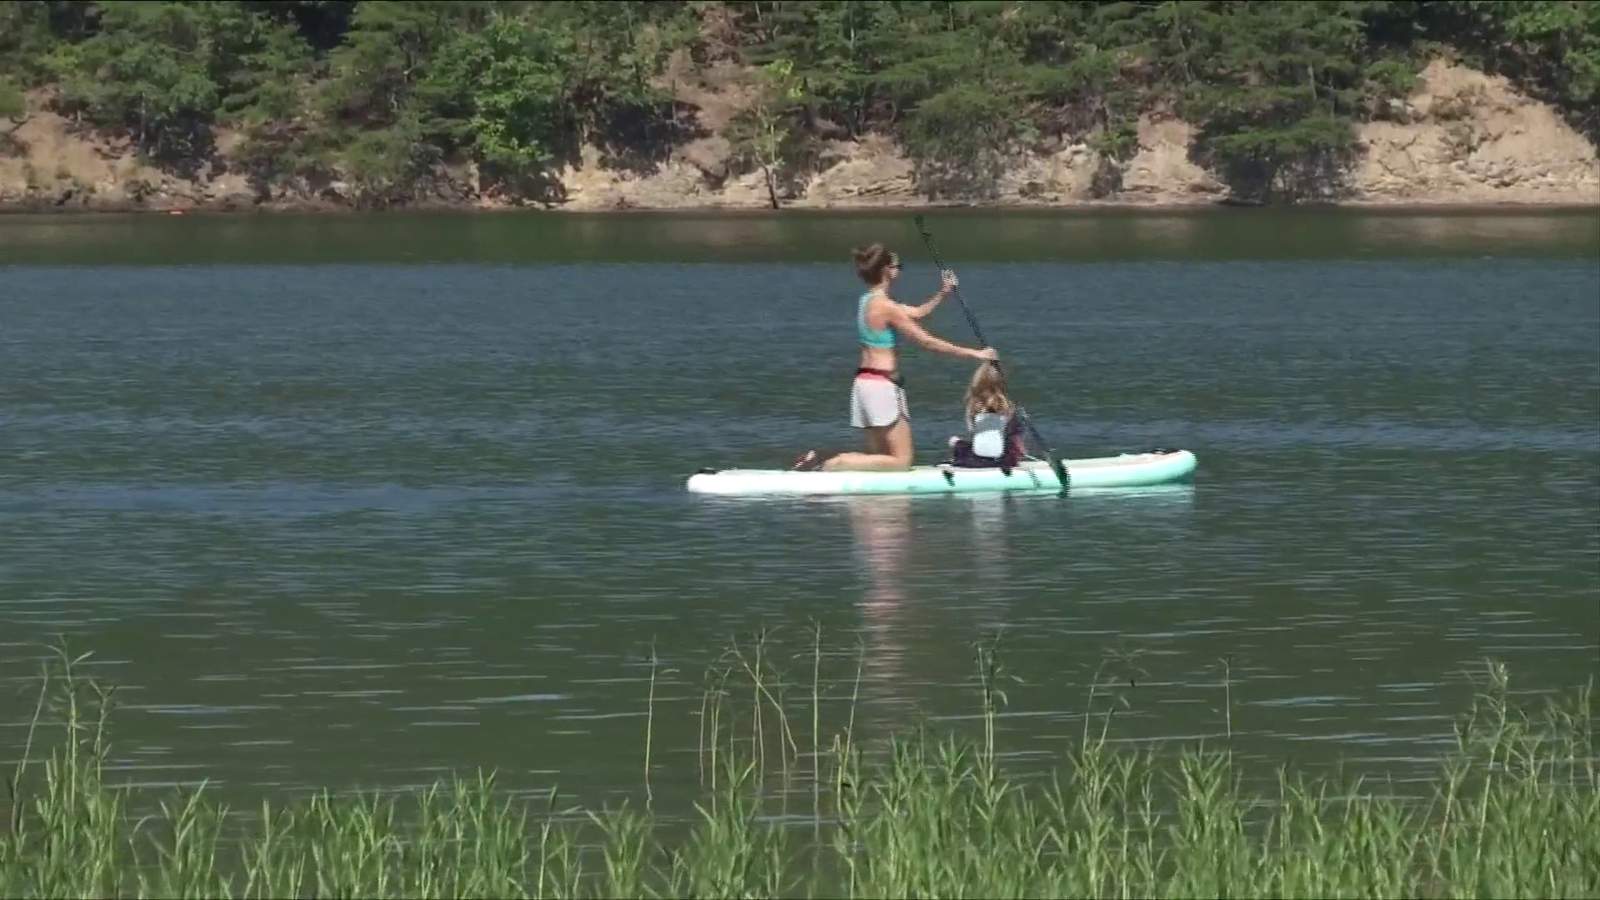 Nature enthusiasts enjoy last free weekend at Carvins Cove before admissions resume